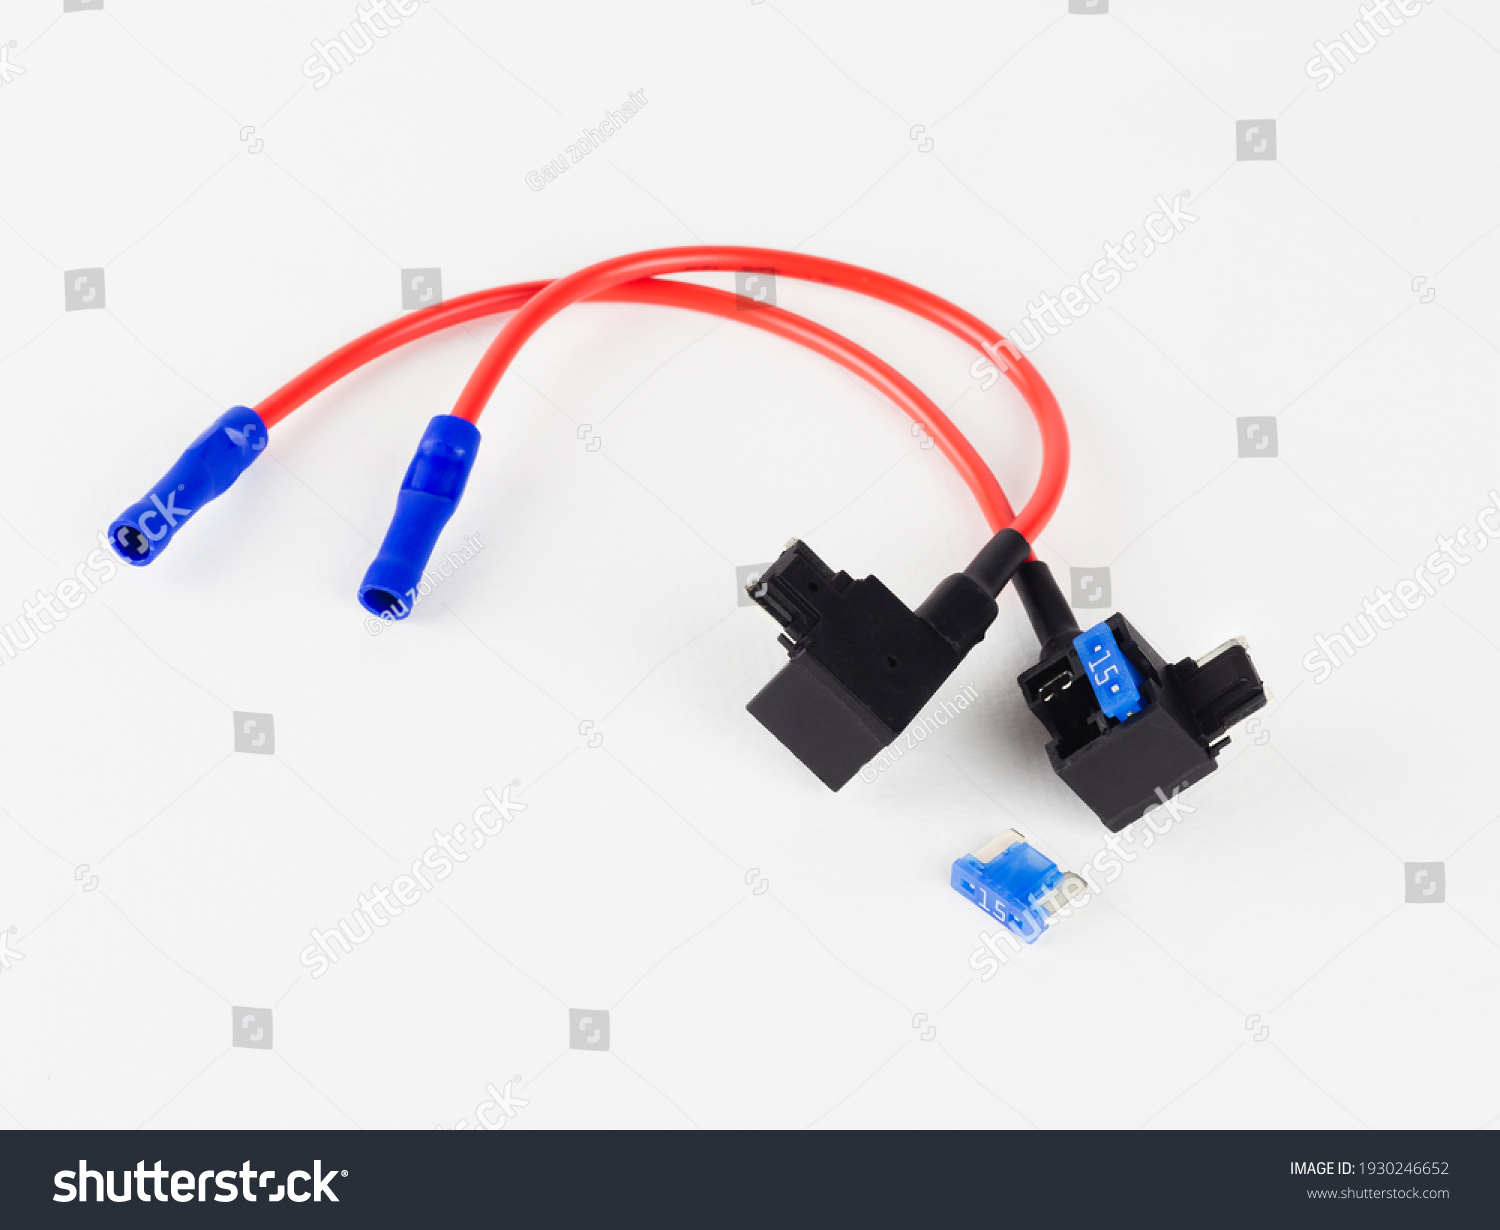 Two micro fuse tap, one has one fuse inserted and a spare fuse placed outside on a white background. #1930246652